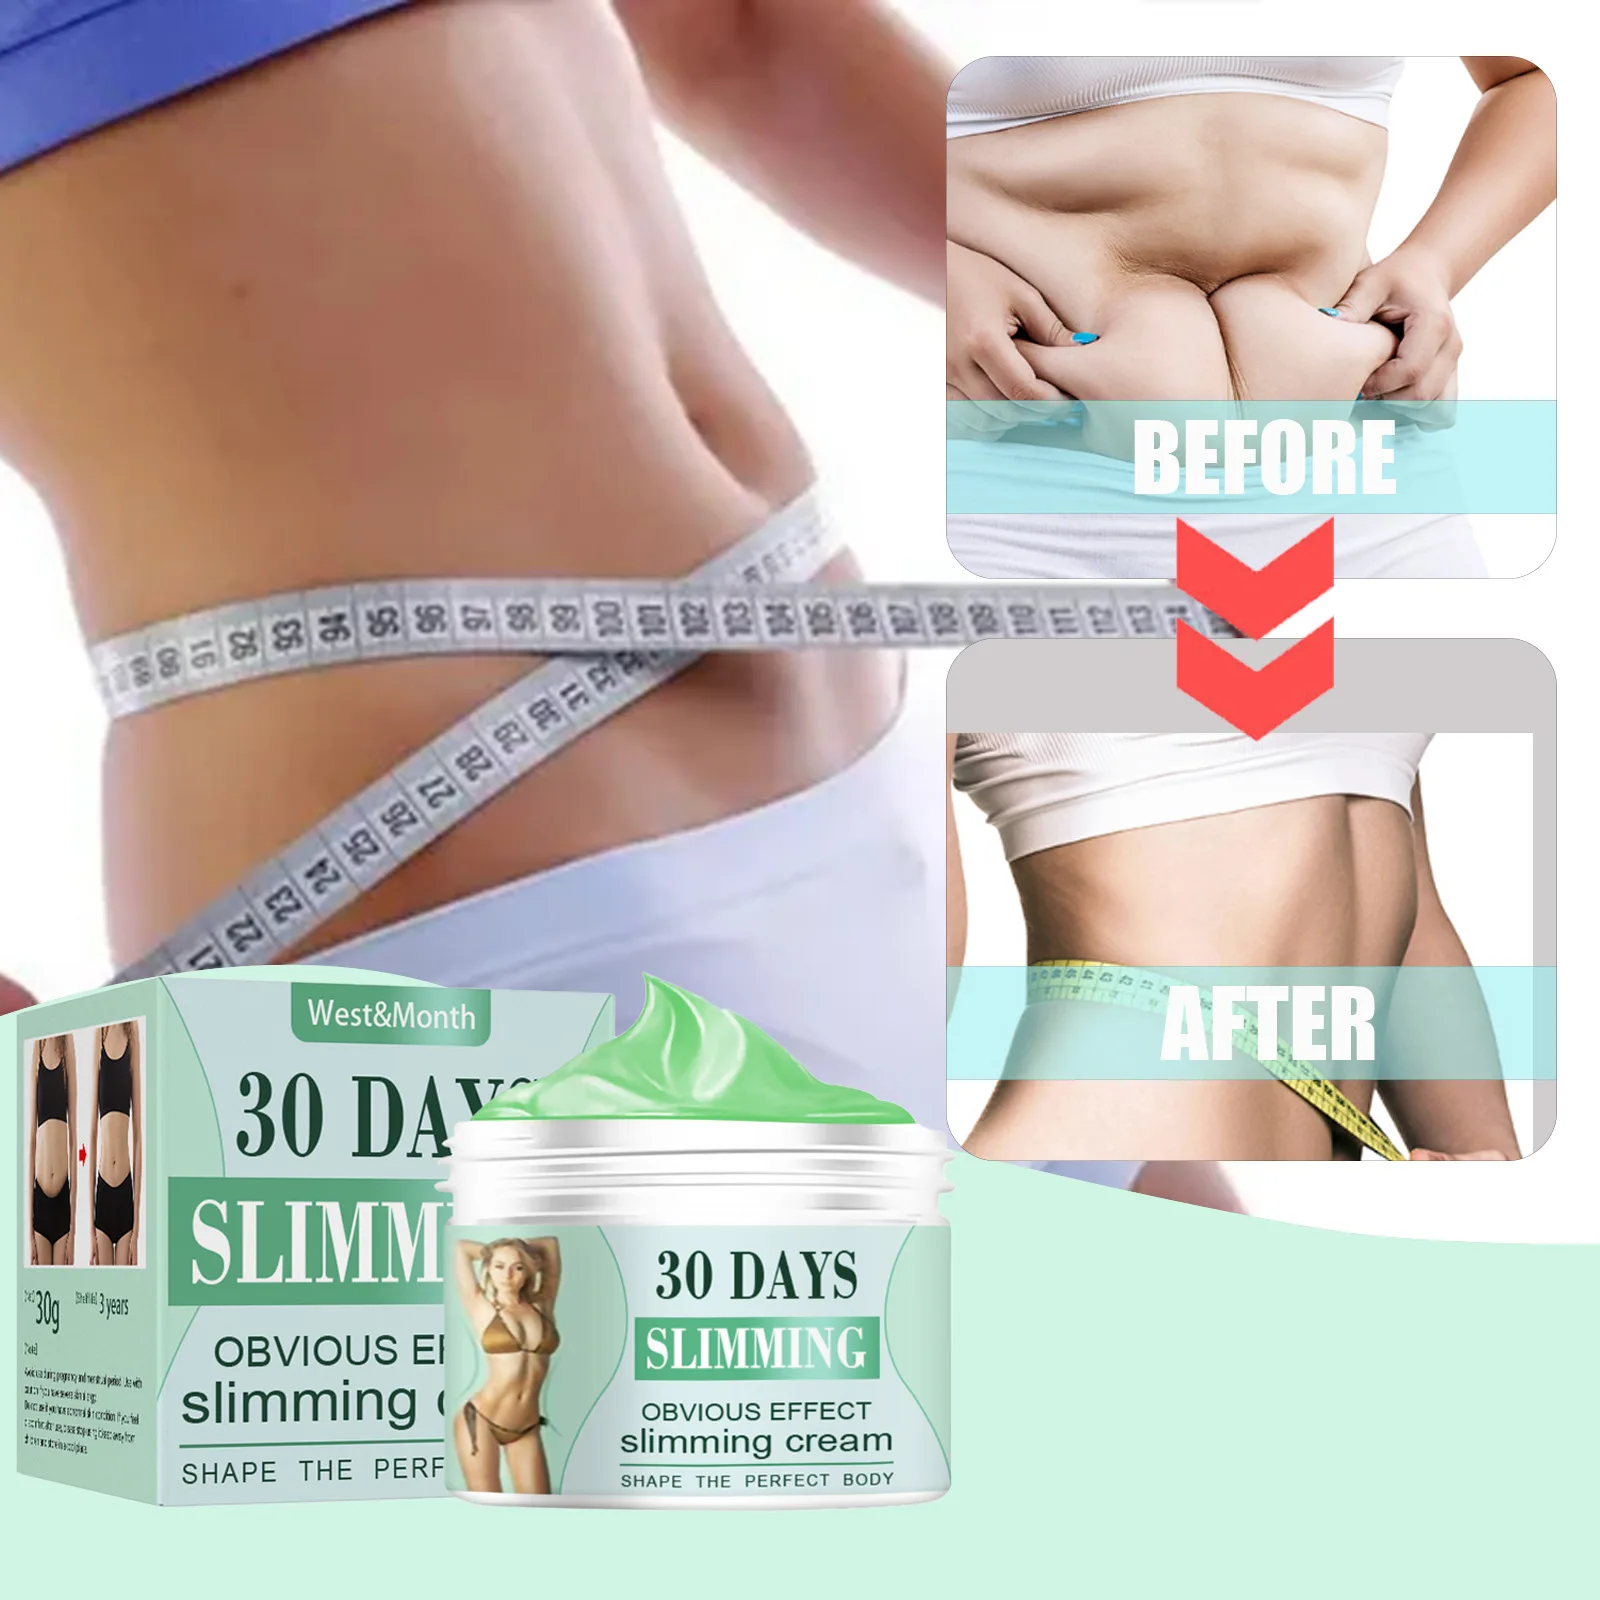 Shaping Massage Cream To Eliminate The Big Stomach, Shape The Body, Shrink The Abdomen and Lose Weight Build Muscles Cream